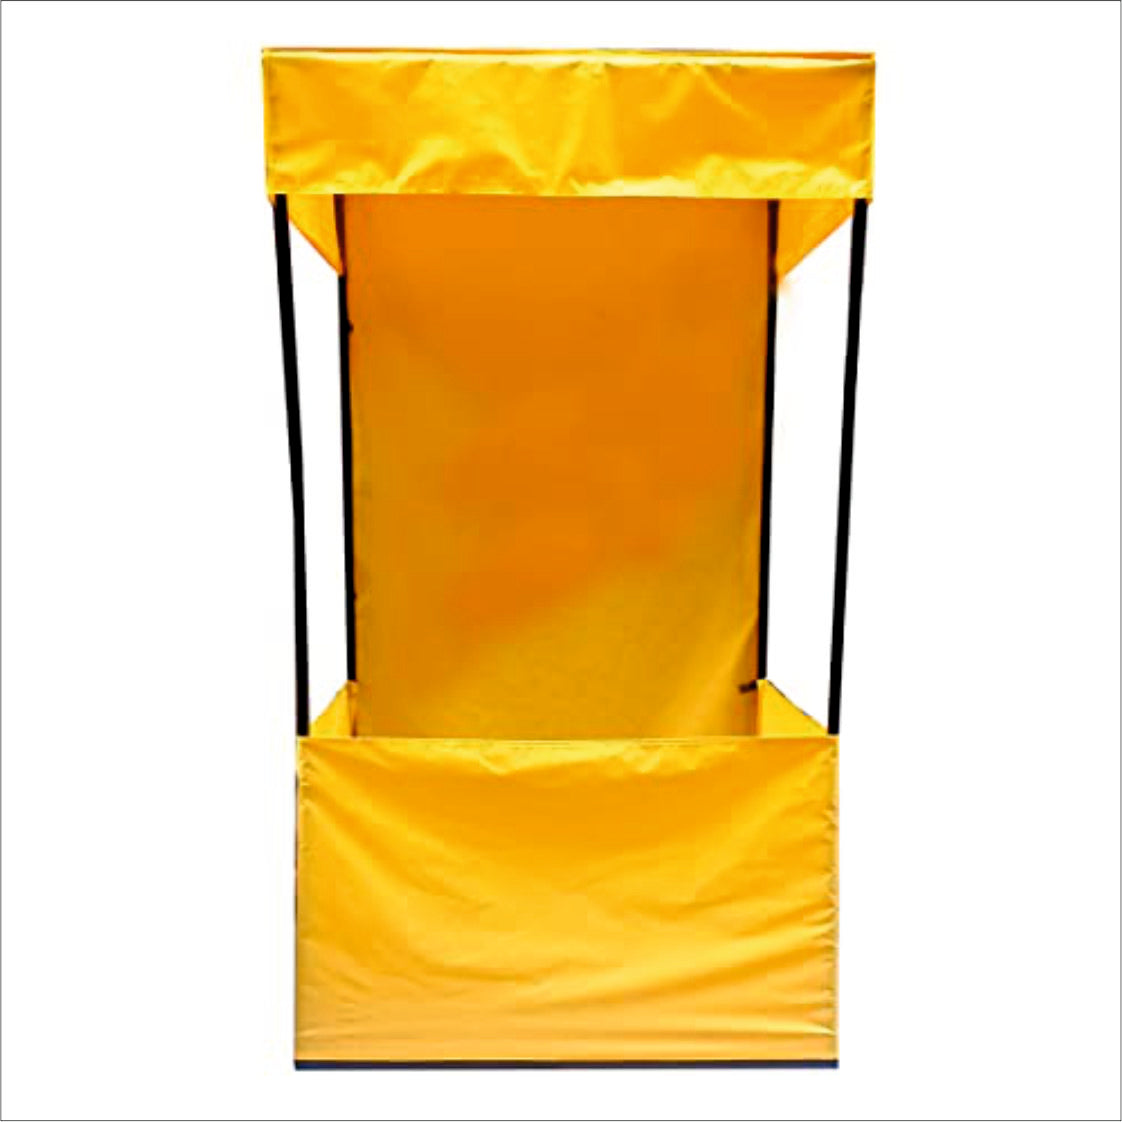 Promotional Canopy Tent (4' x 4' x 7') - Only Structure